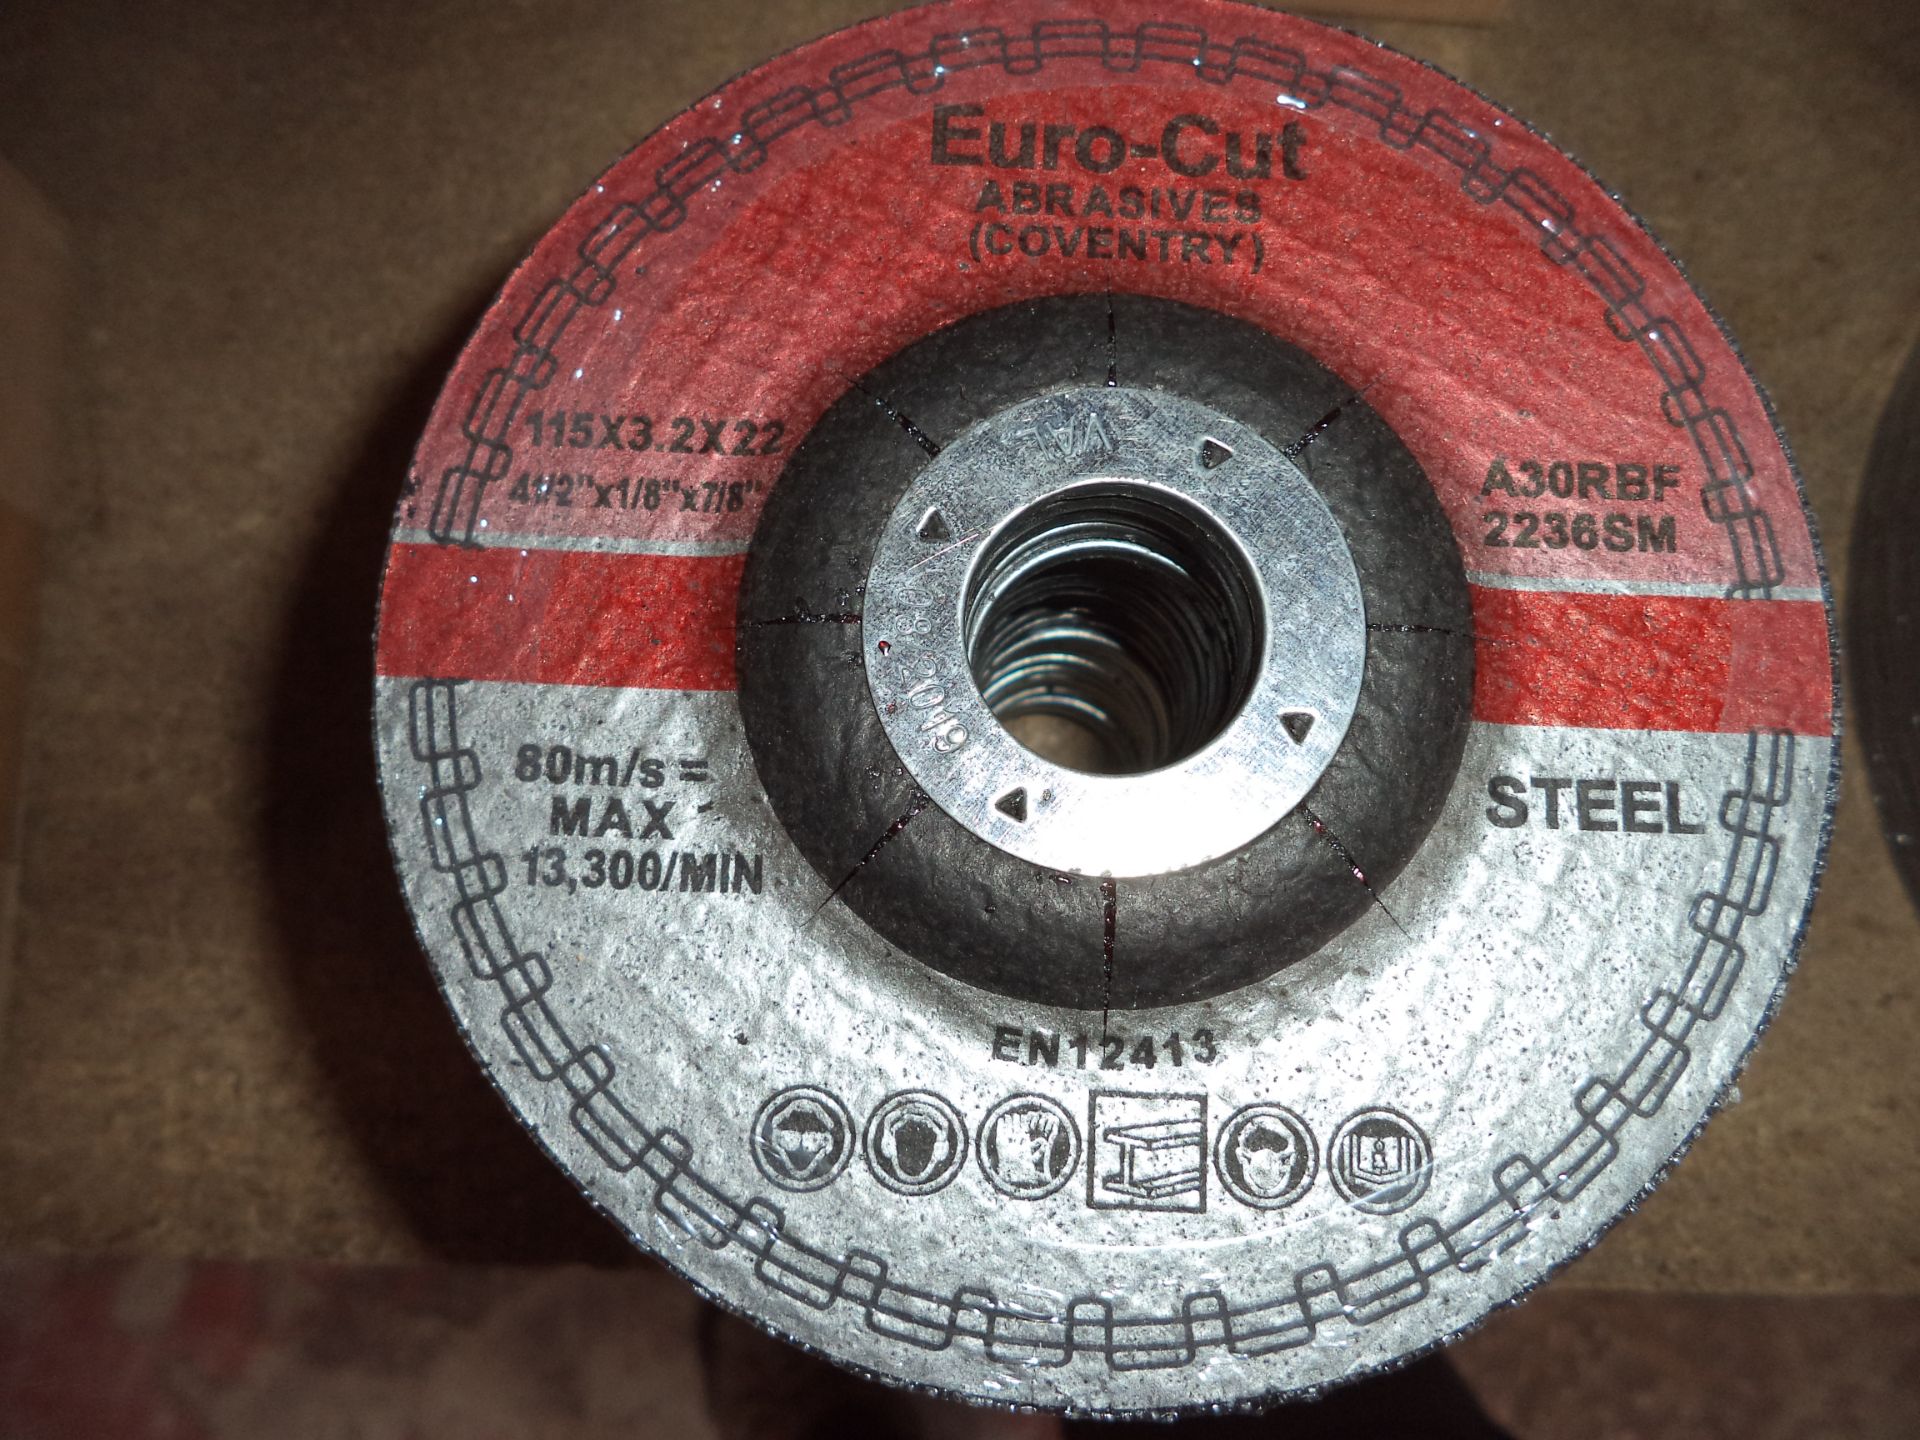 100 off Euro-cut Abrasives 115 x 3 x 22 discs IMPORTANT: Please remember goods successfully bid upon - Image 2 of 2